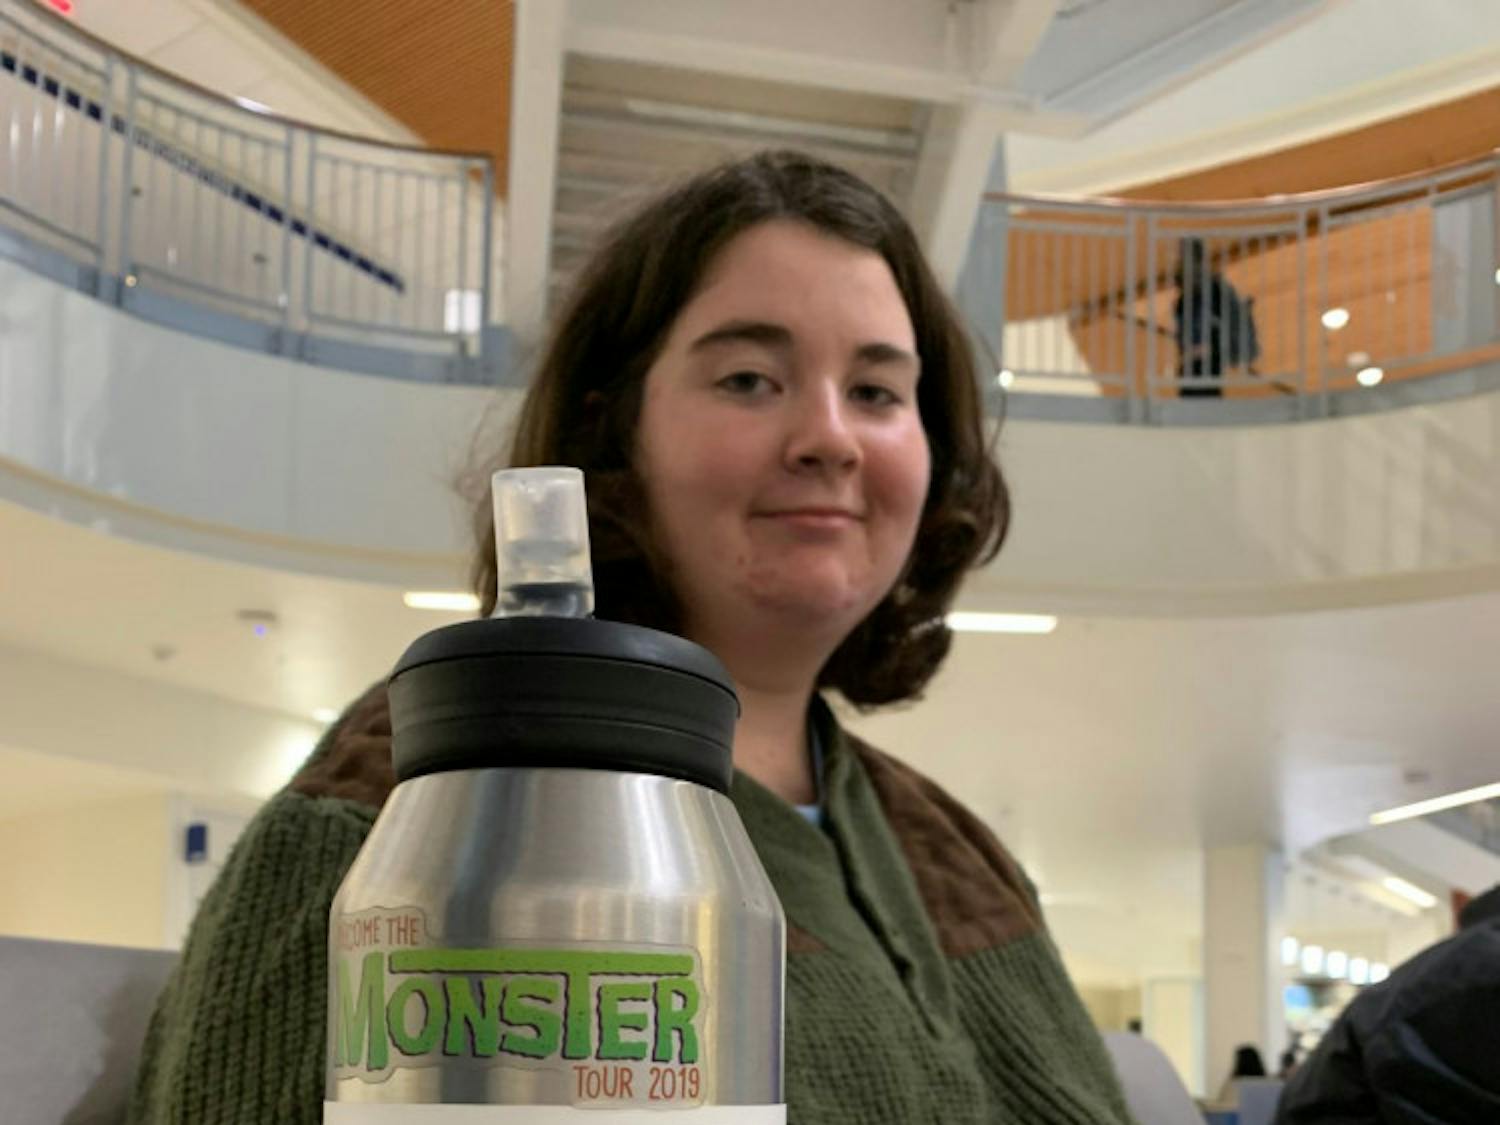 Nora Brown's stickers, which she proudly displays on her water bottle, speak to her experience interning in Washington D.C. over the summer.&nbsp;